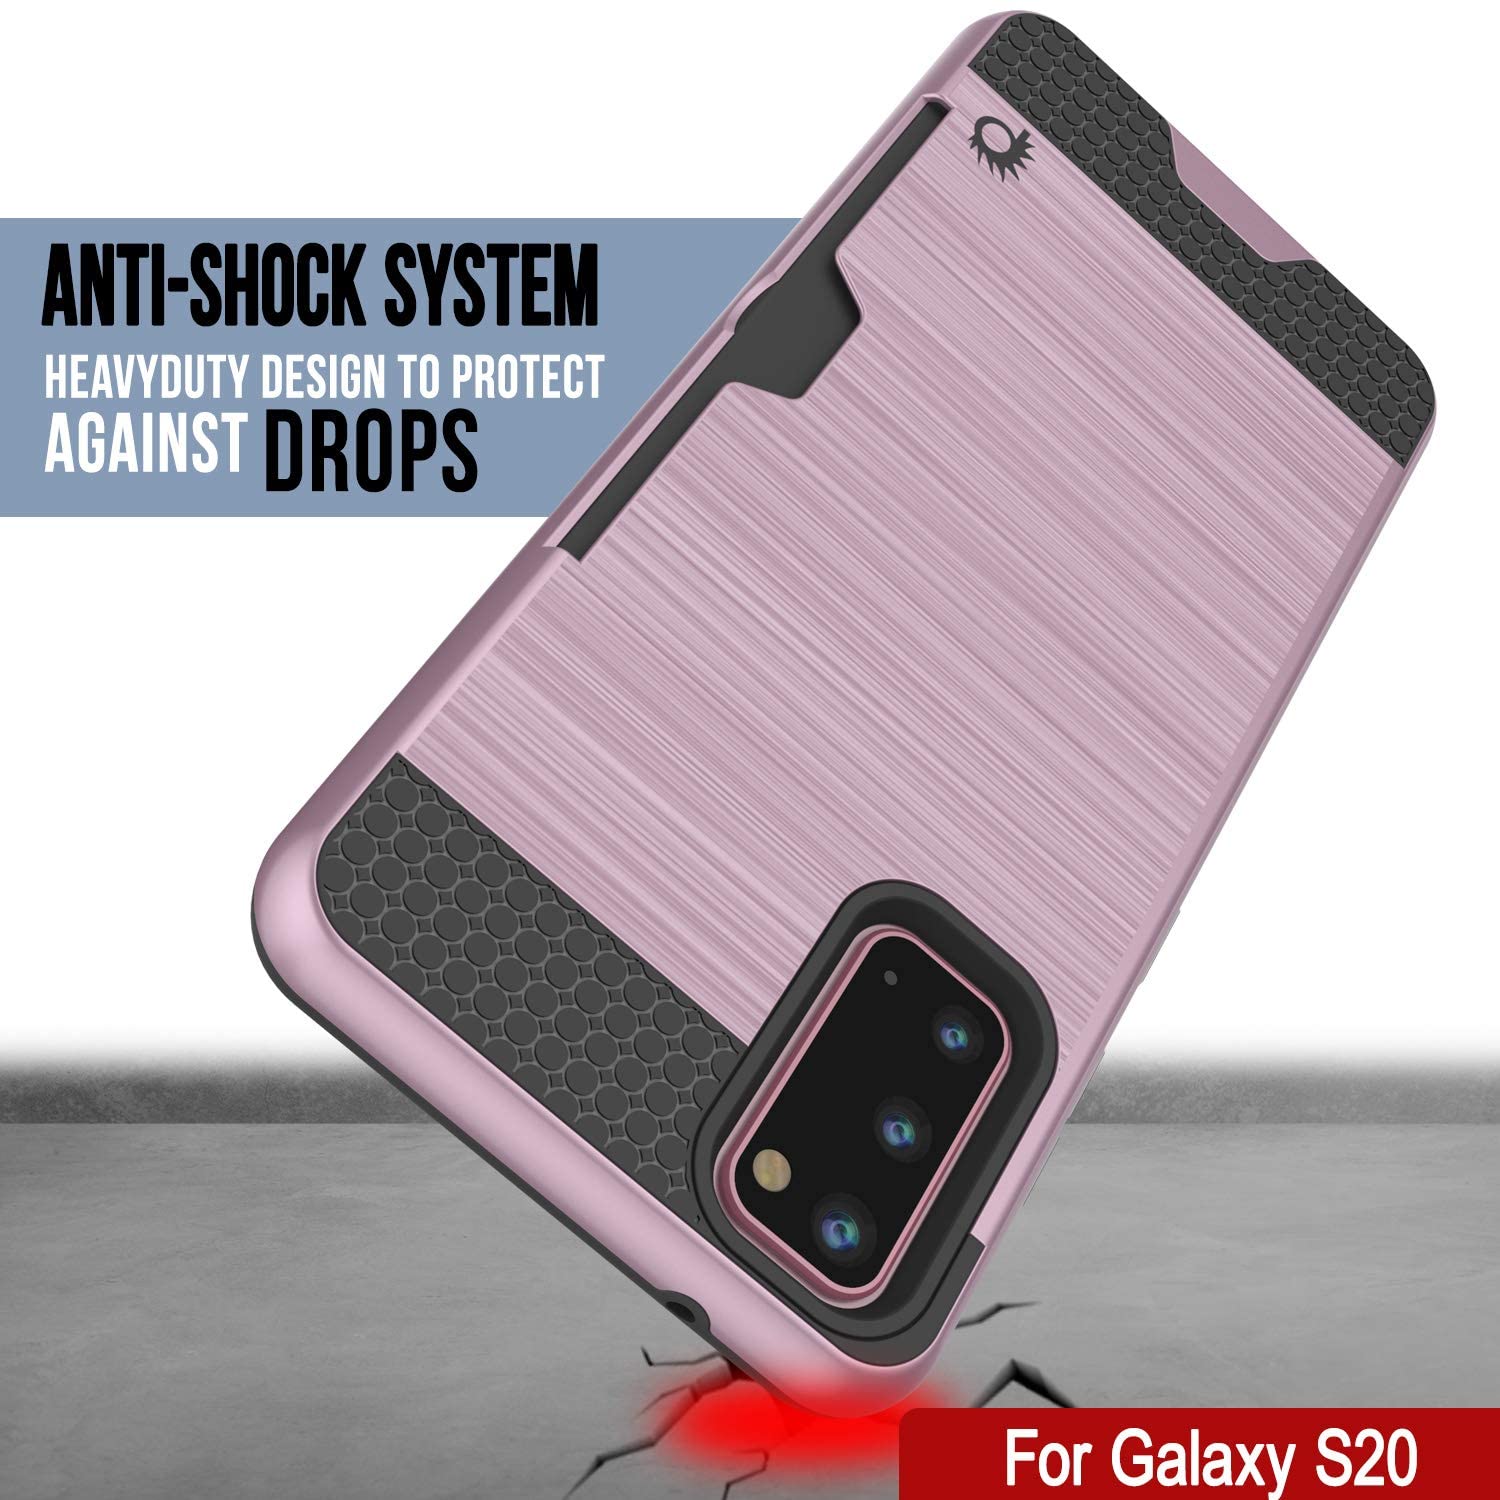 Galaxy S20 Case, PUNKcase [SLOT Series] [Slim Fit] Dual-Layer Armor Cover w/Integrated Anti-Shock System, Credit Card Slot [Pink]